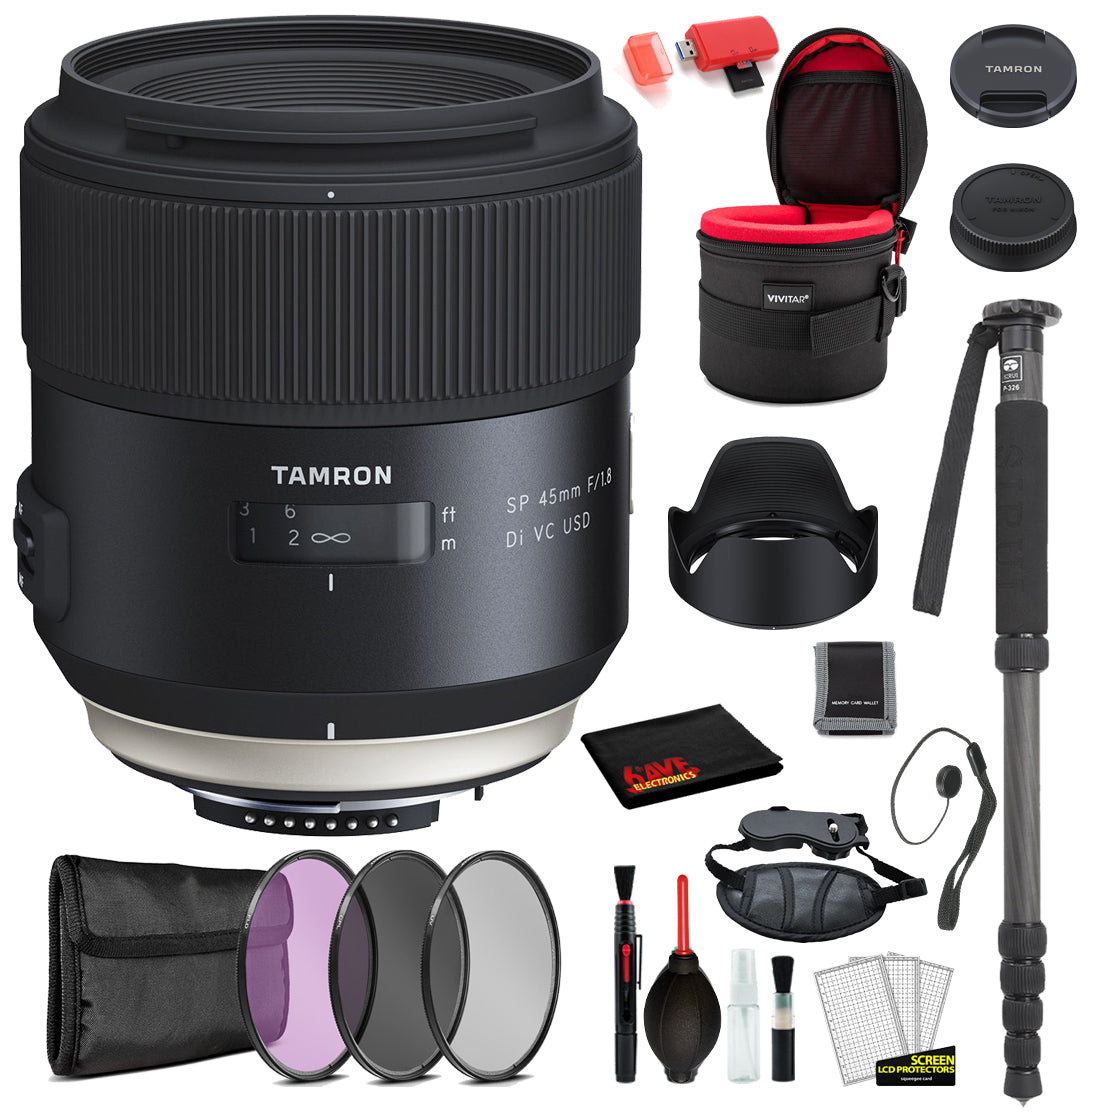 Tamron SP 45mm f/1.8 Di VC USD Lens for Nikon F  with Bundle Includes: Vivtar Padded Lens Case, 3PC Filter Kit + More